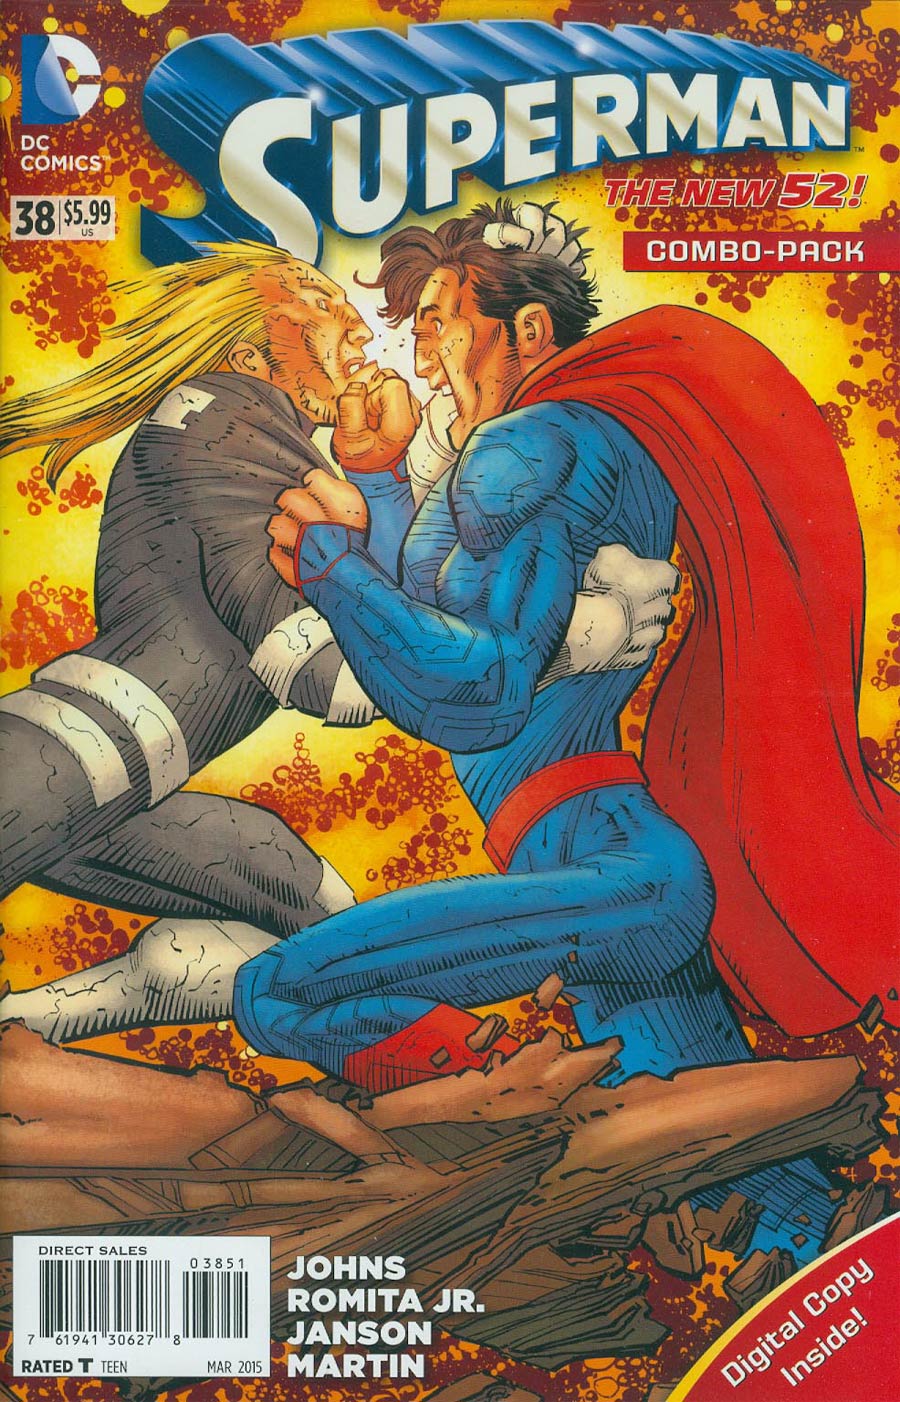 Superman Vol 4 #38 Cover C Combo Pack With Polybag